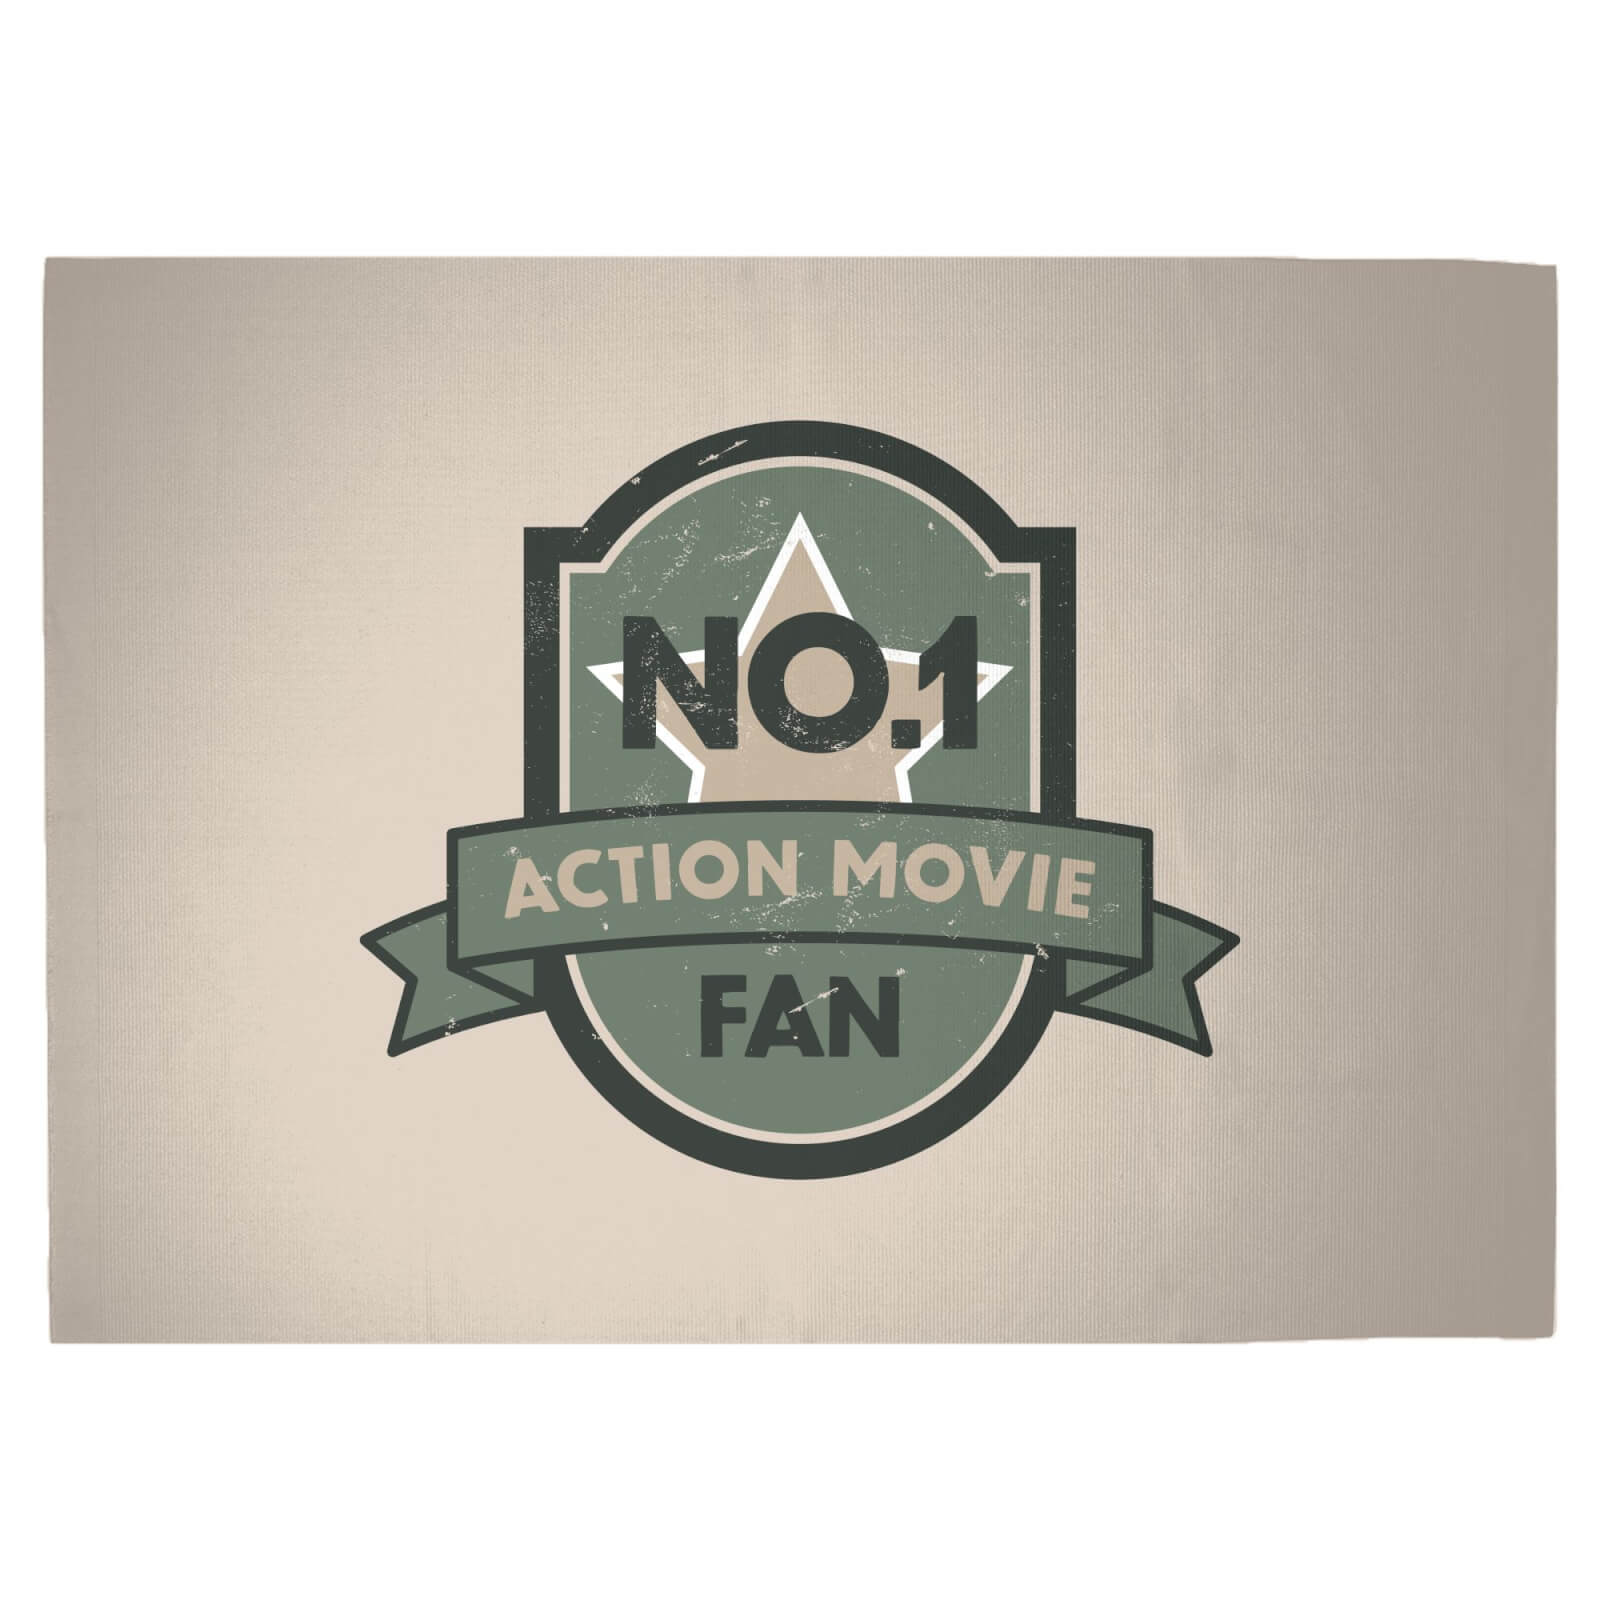 No.1 Action Movie Fan Woven Rug - Large